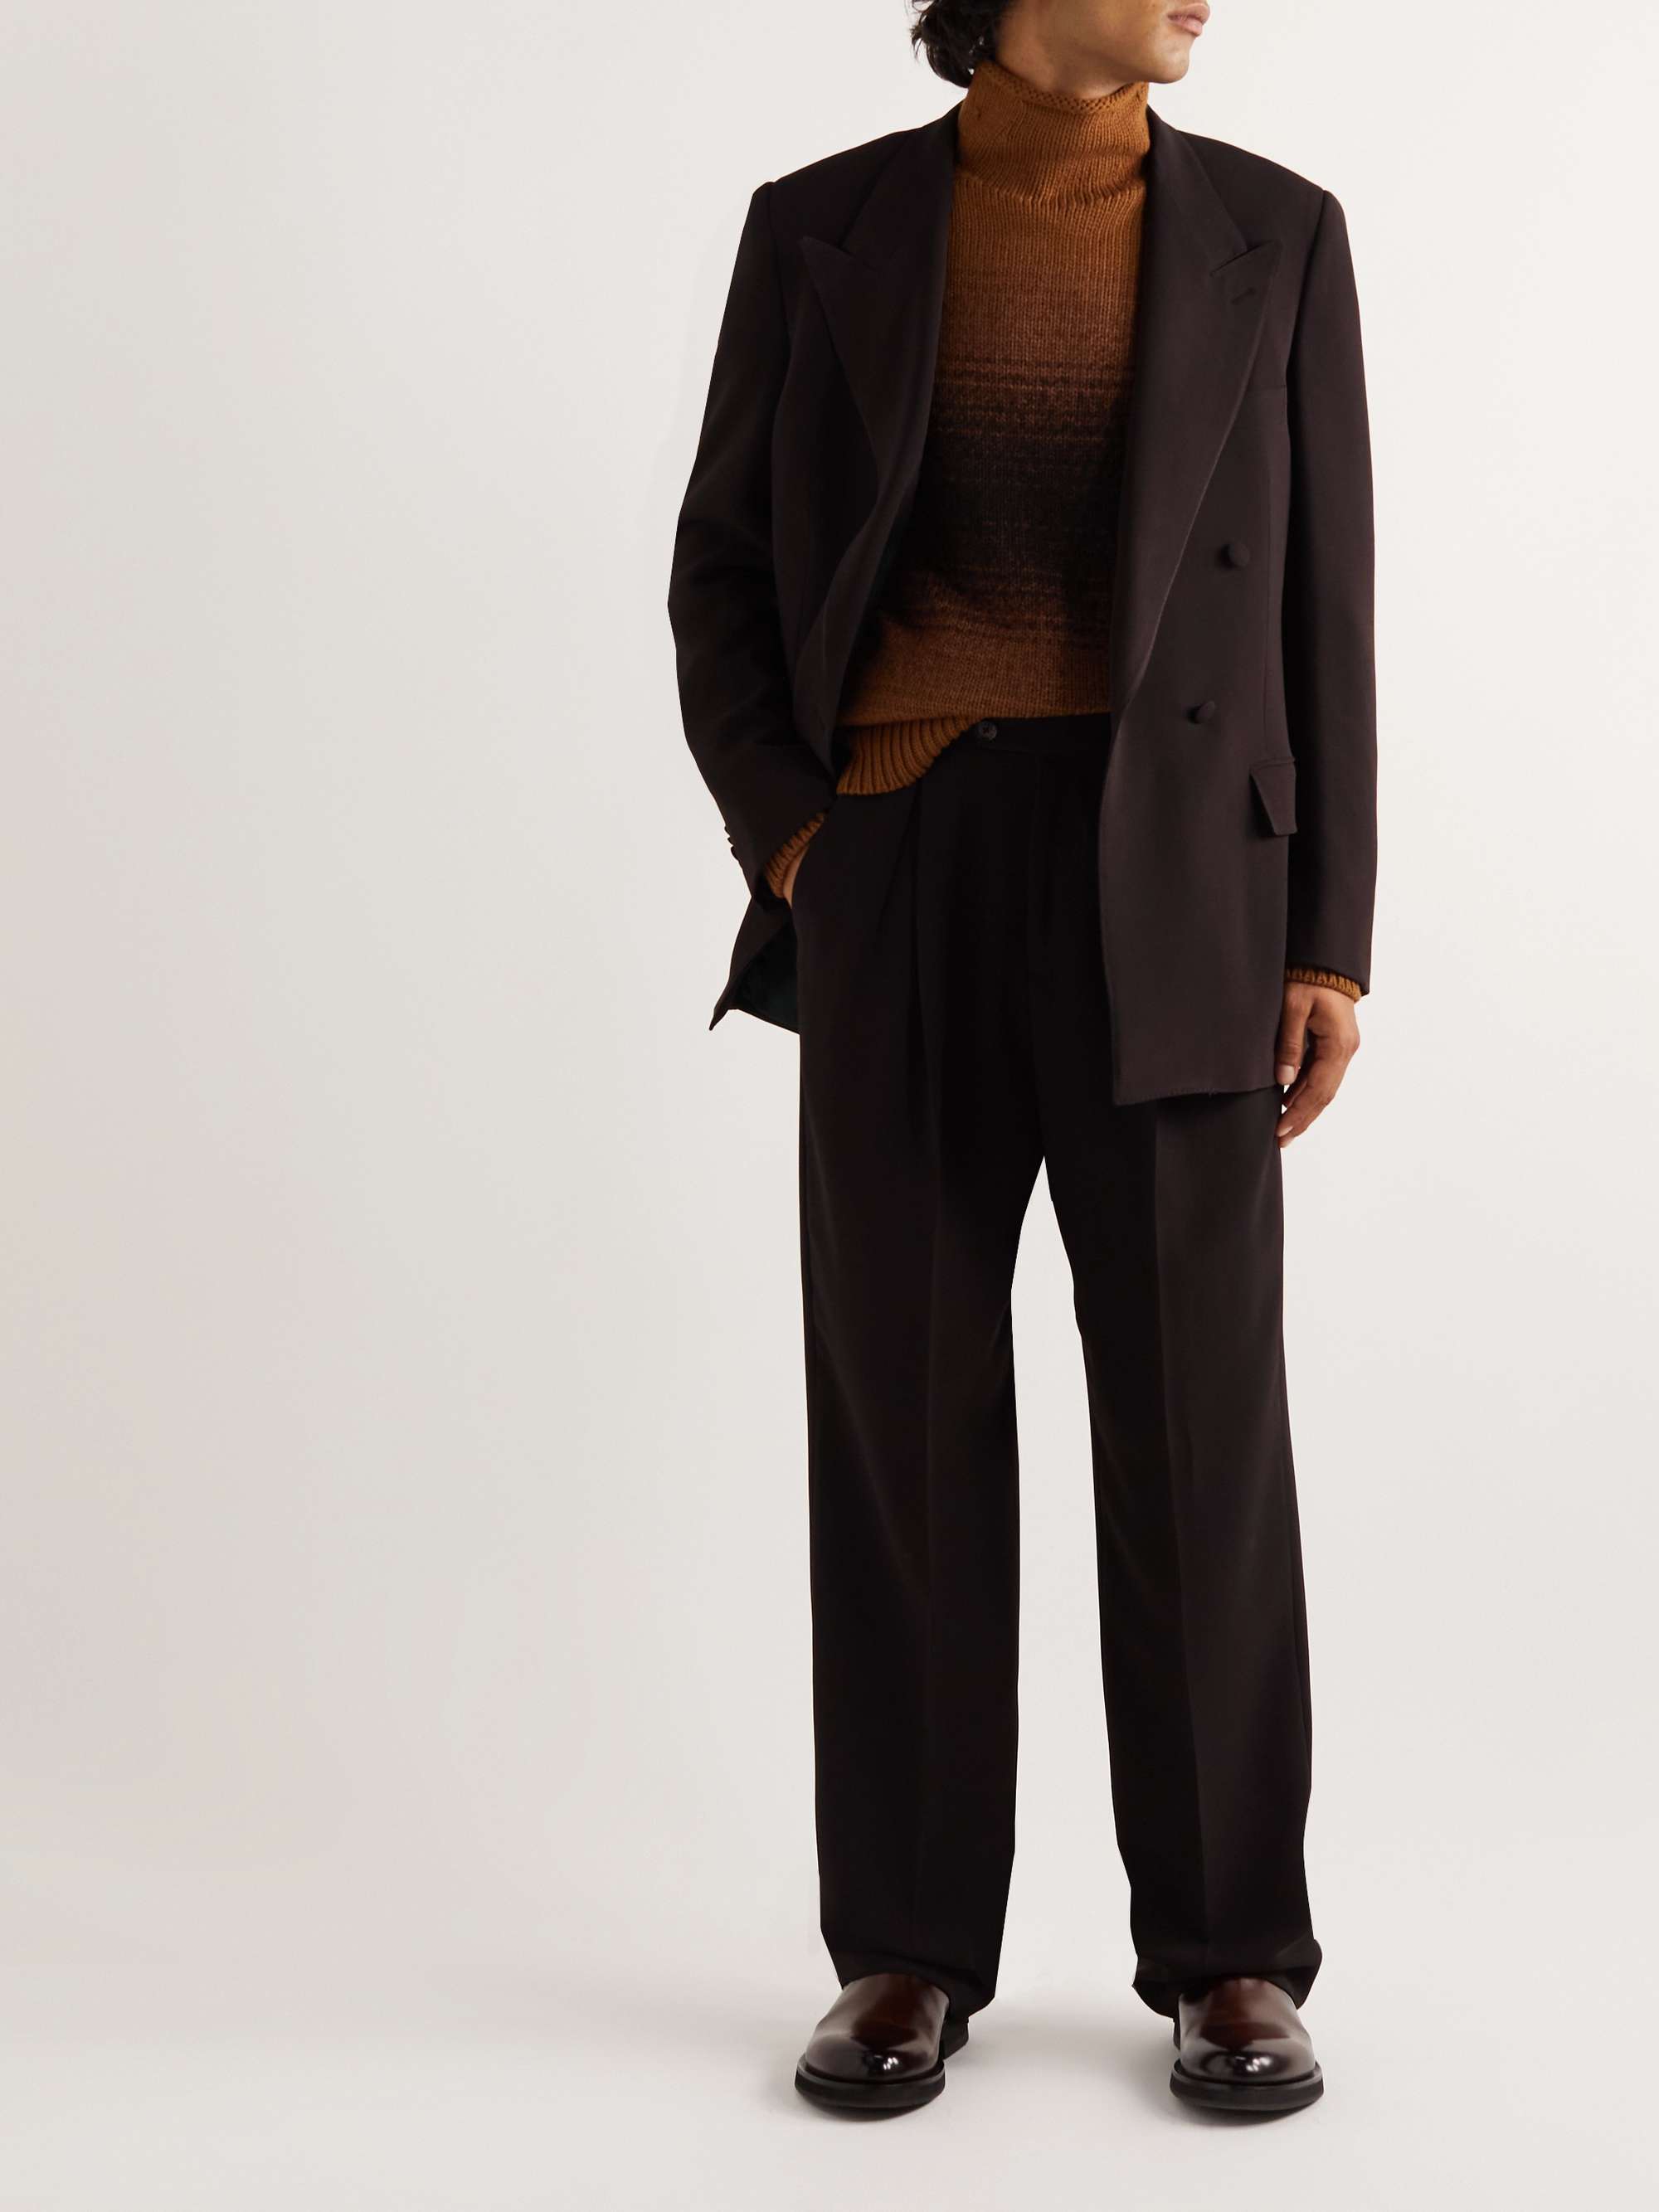 UMIT BENAN B+ Double-Breasted Crepe Suit Jacket